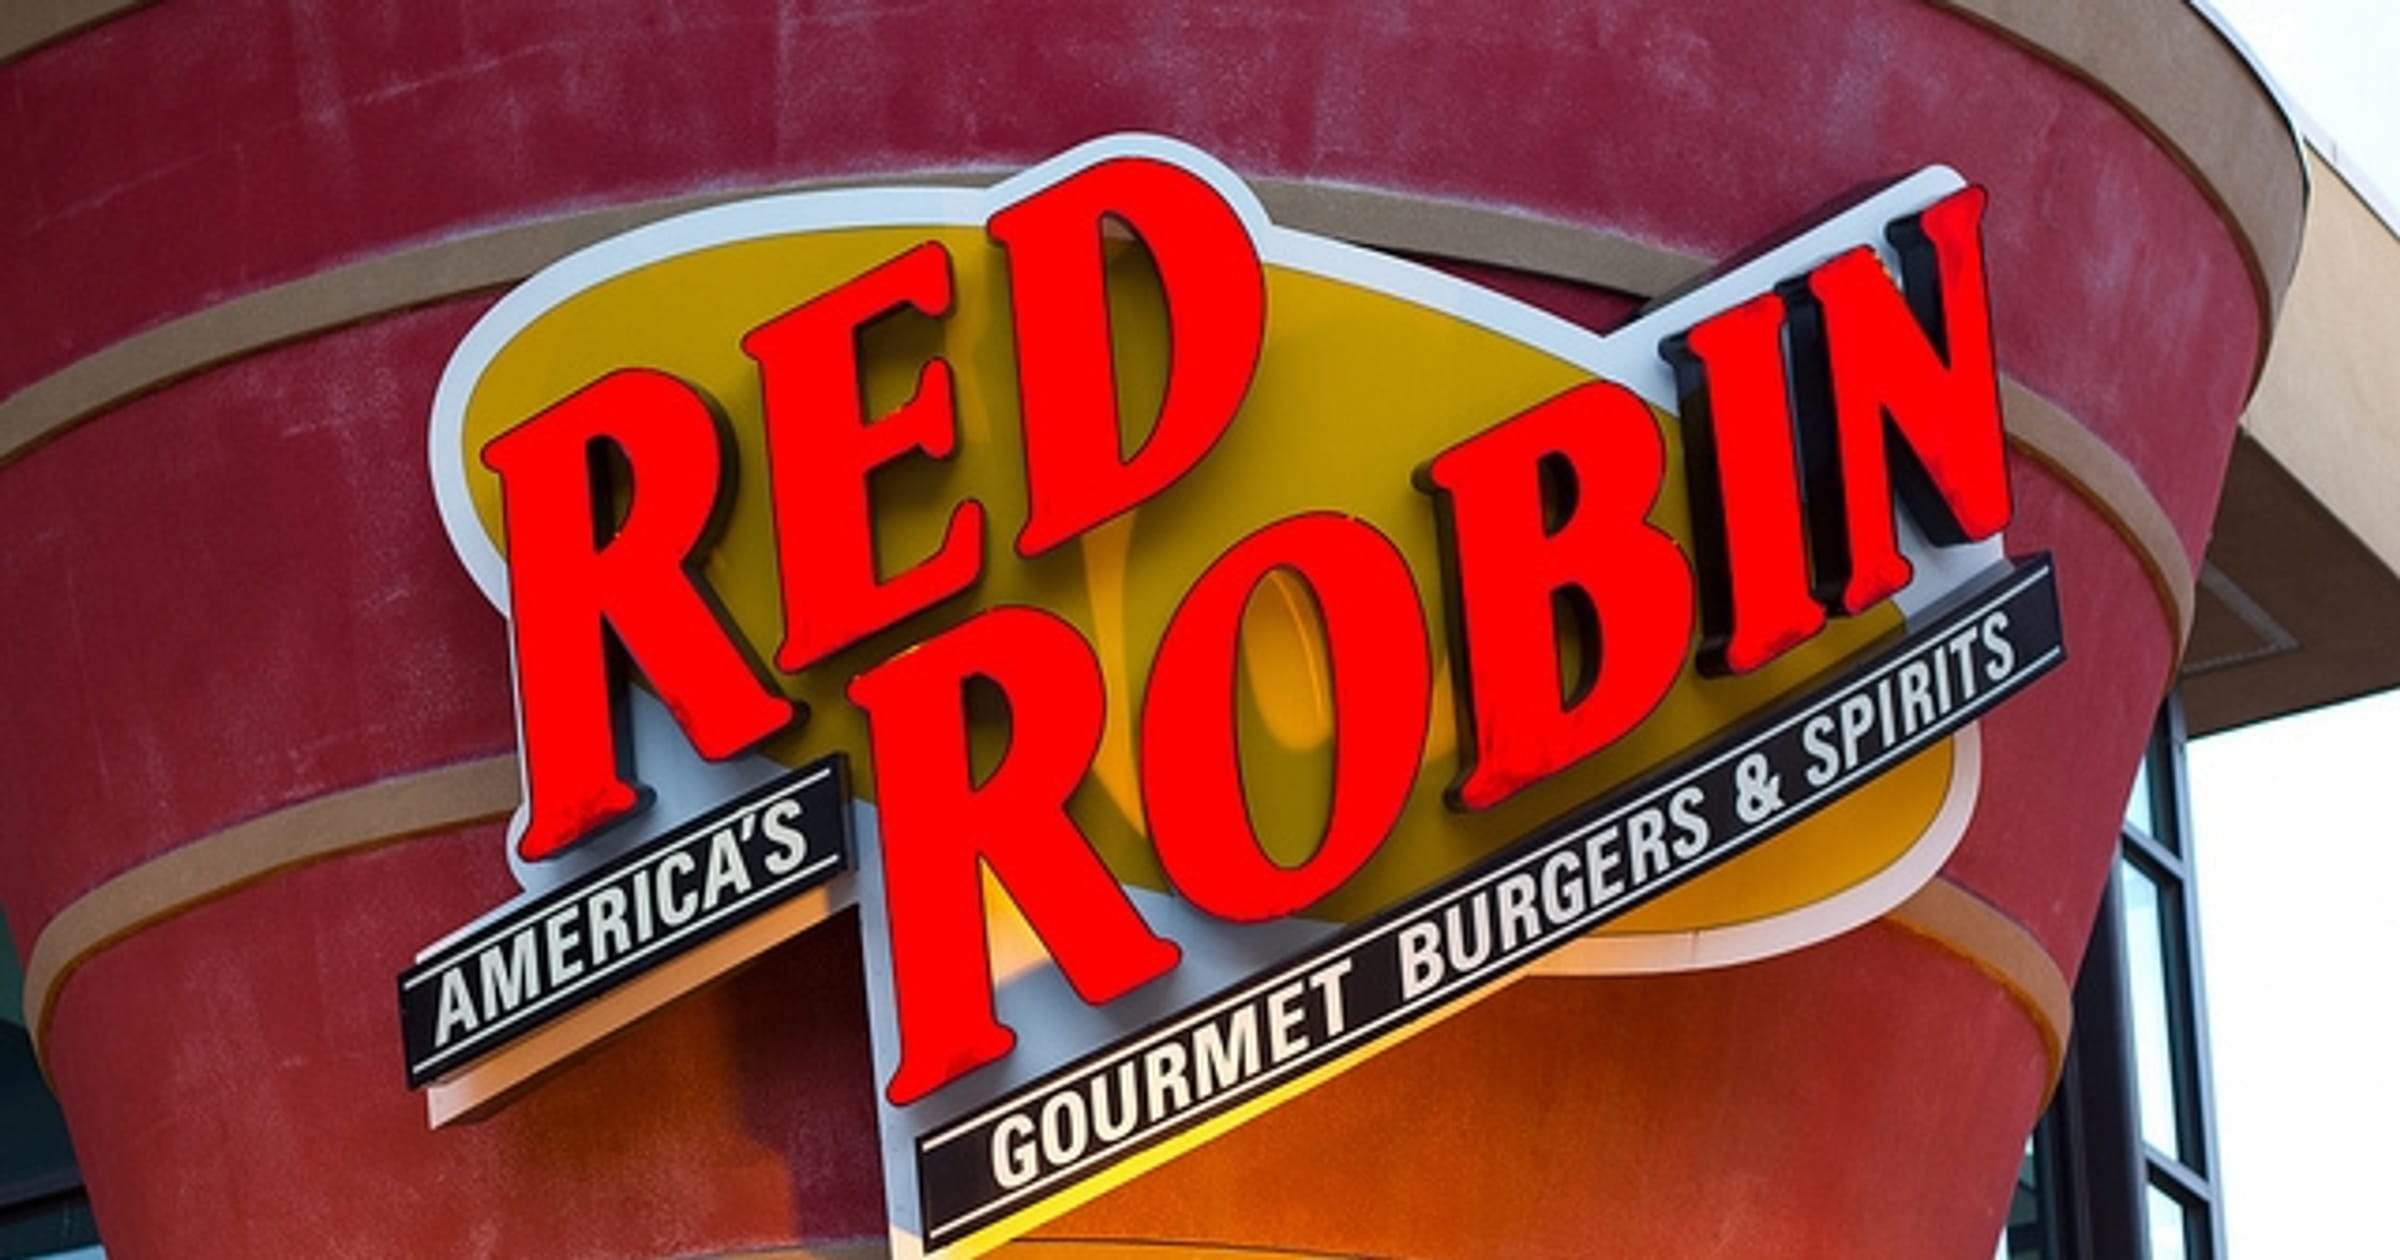 Red Robin Recipes: How to Make Red Robin Food at Home